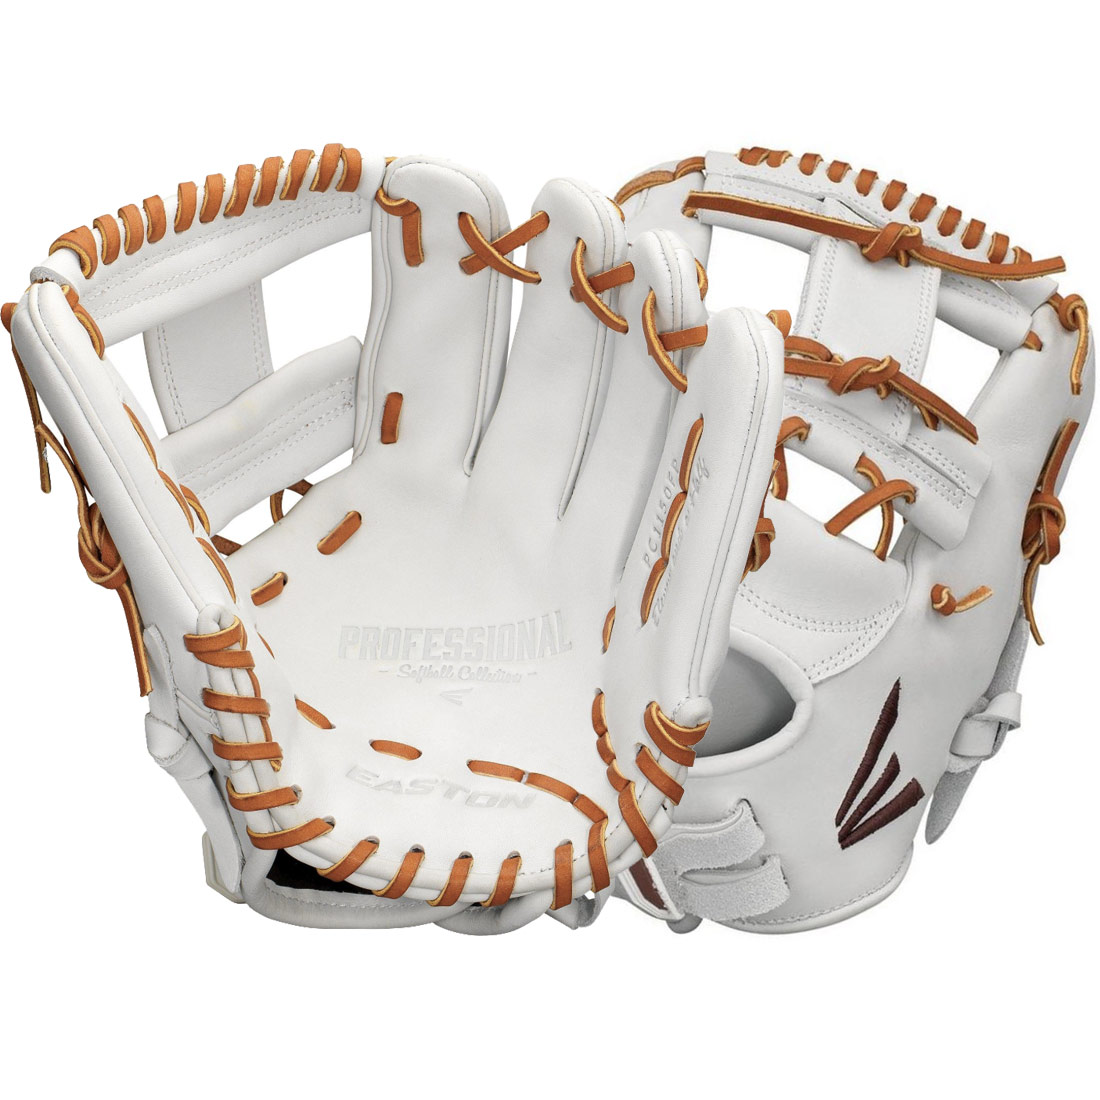 Easton Pro Collection Fastpitch Softball Glove 11.5\" PC1151FP